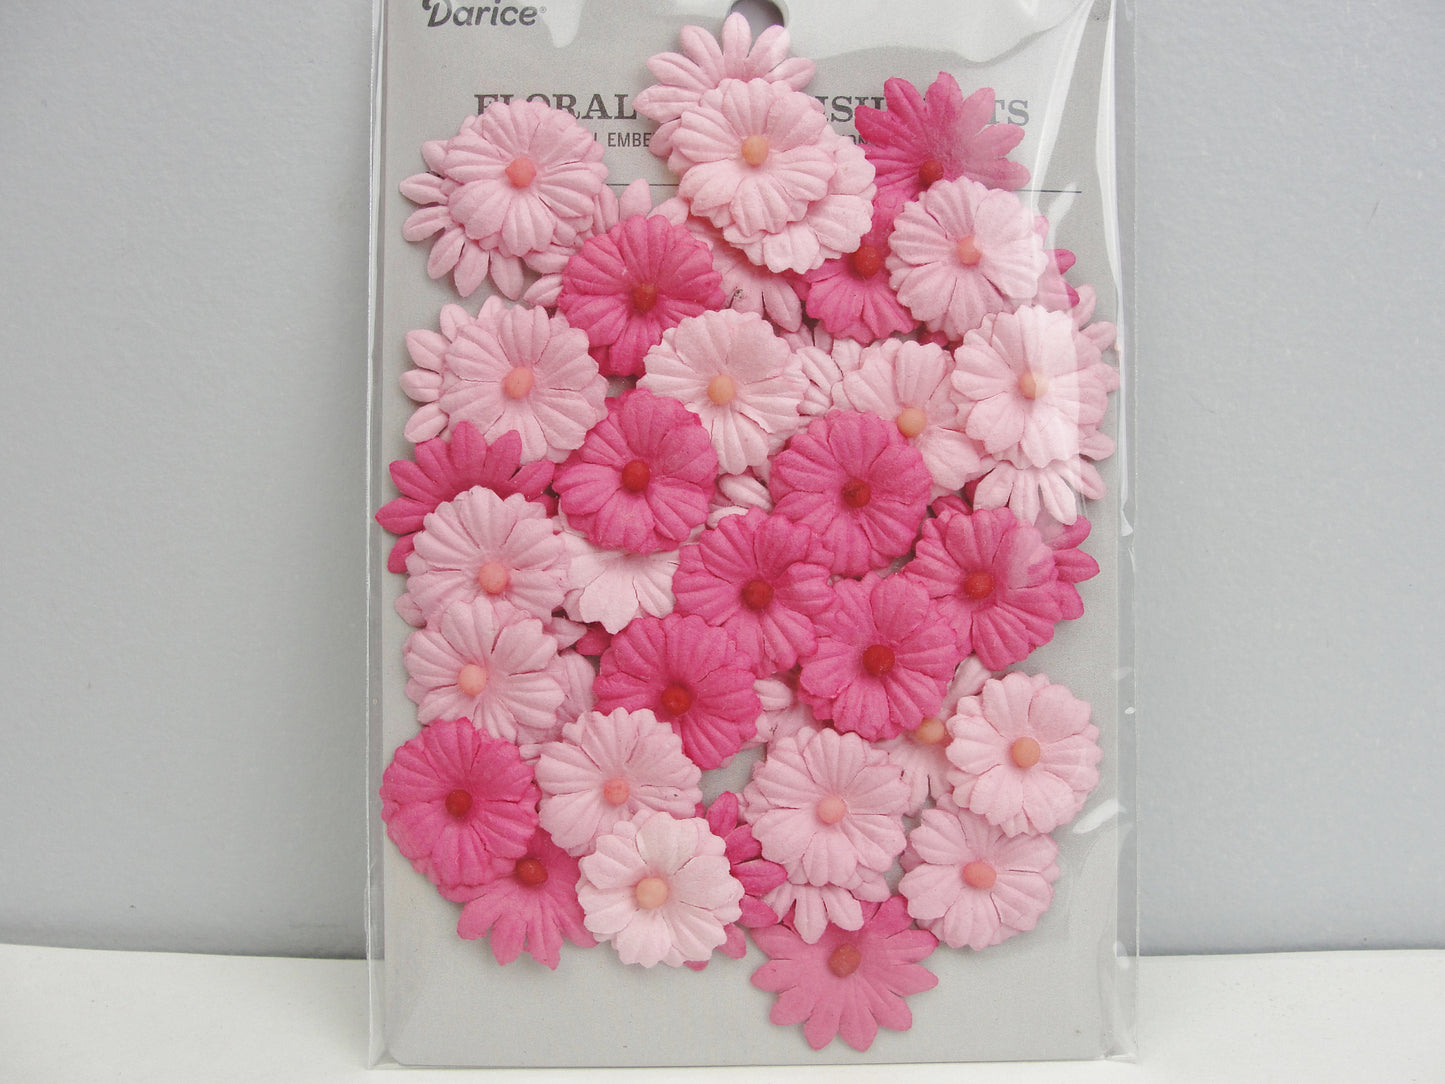 Fabric floral flower embellishments for cards or mixed media art